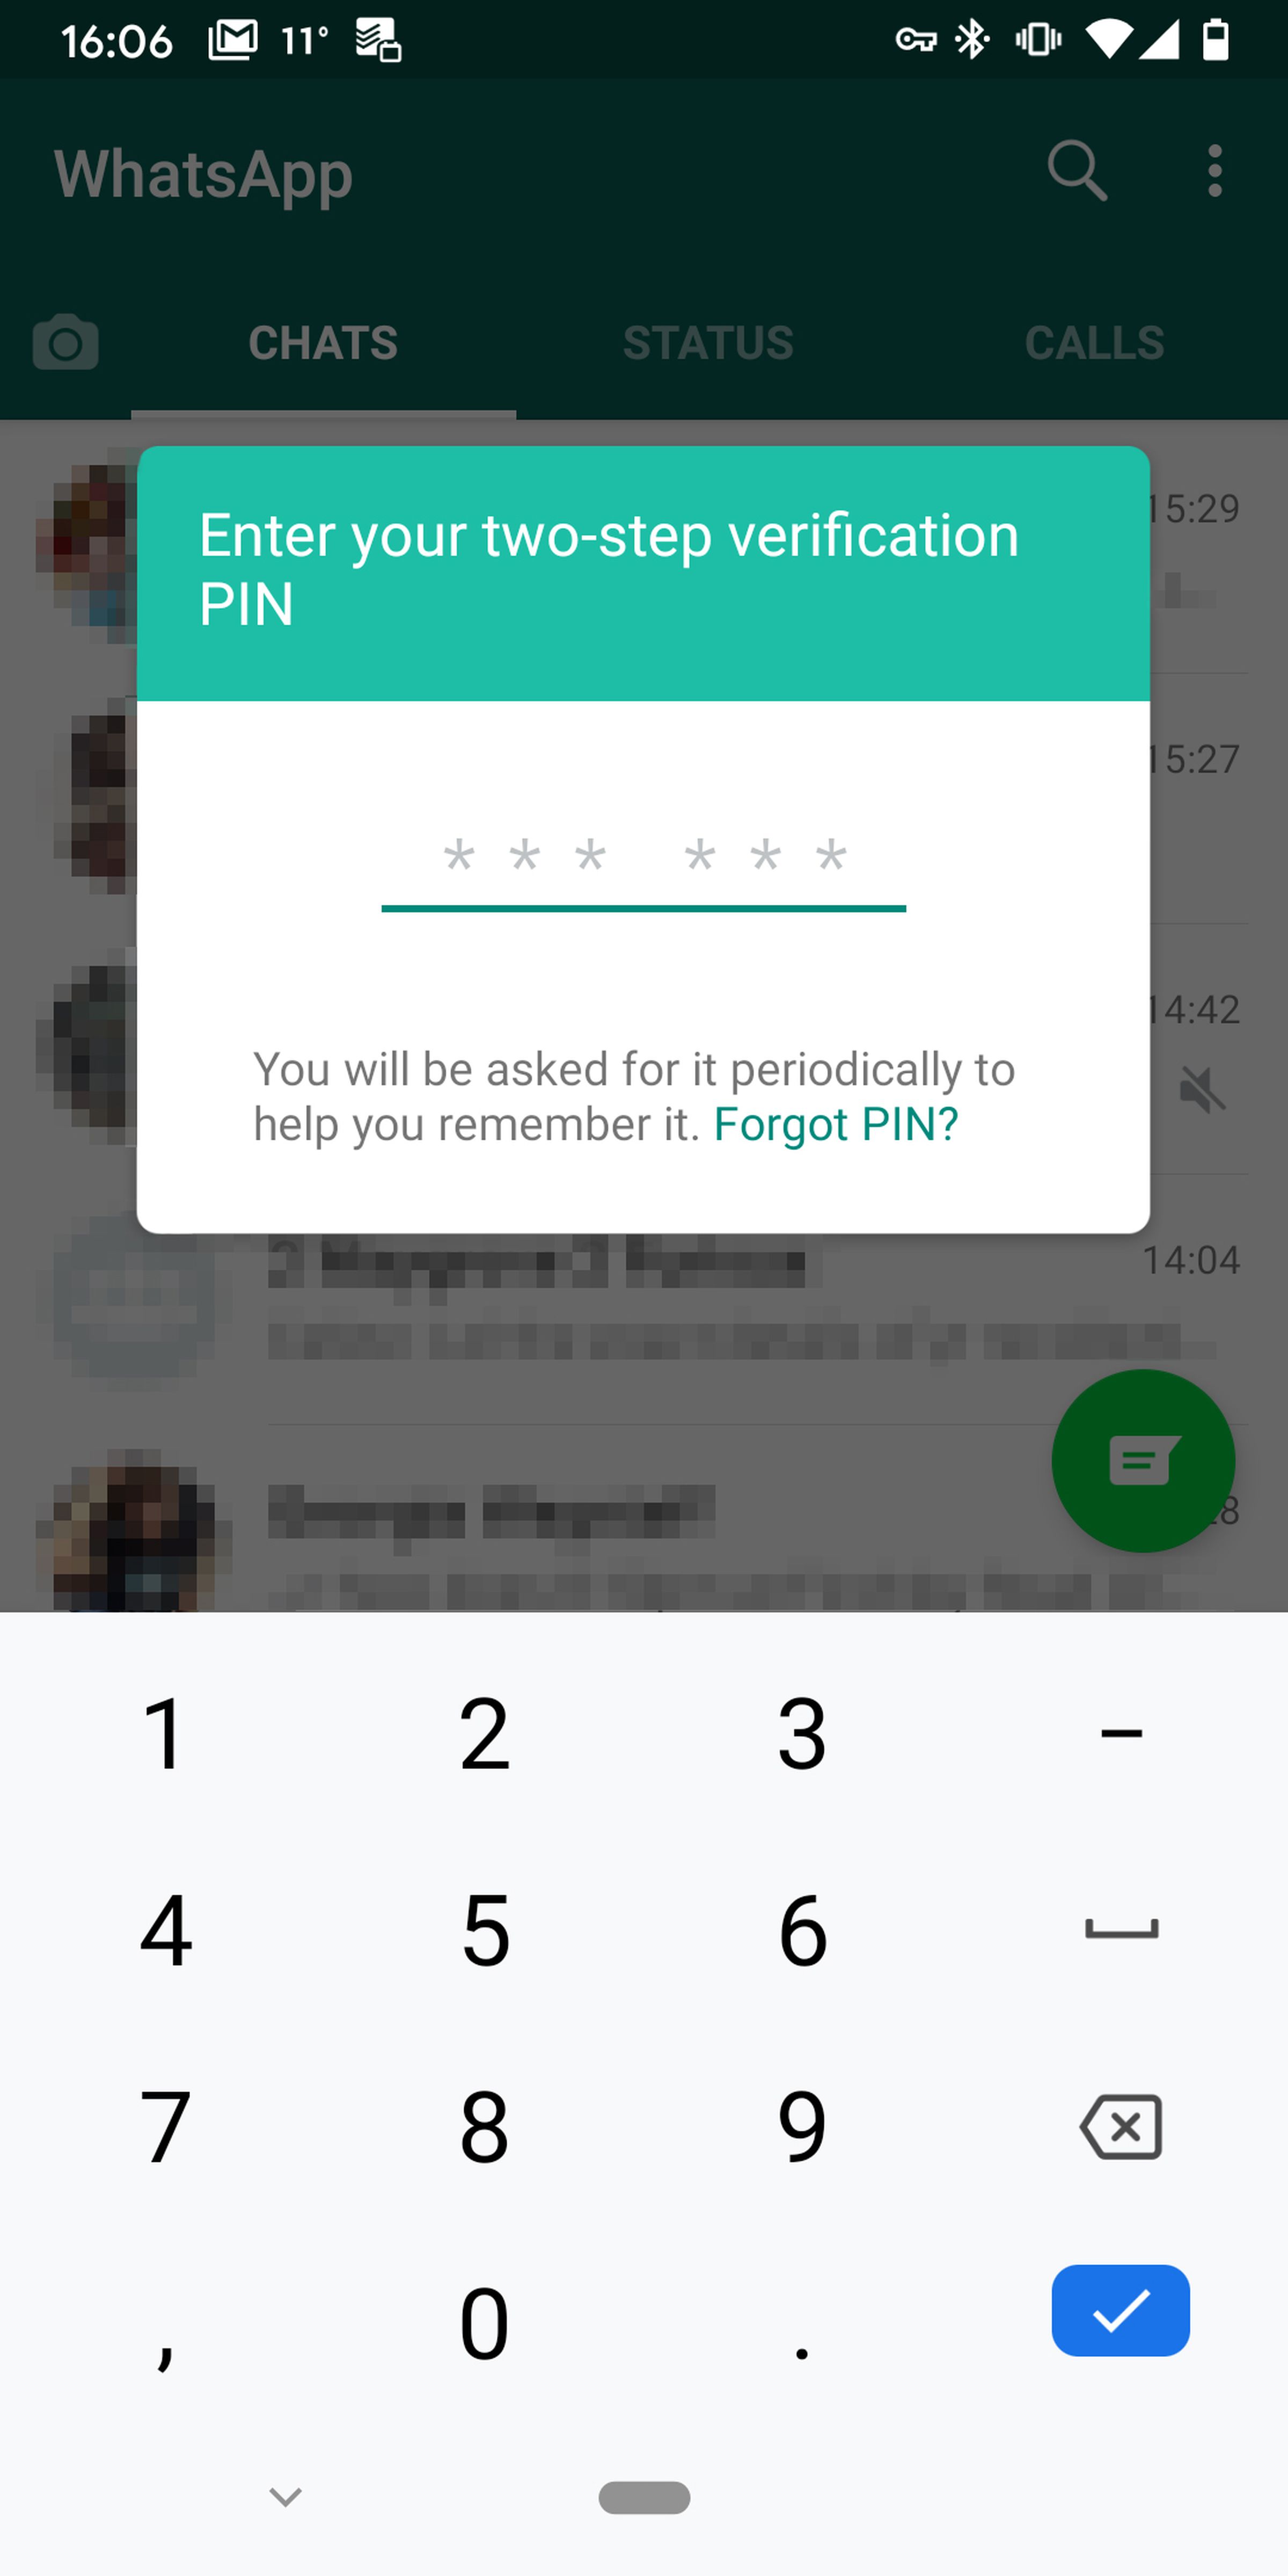 <em>Once you set a PIN, WhatsApp will intermittently ask you to enter it so that you don’t forget it.</em>